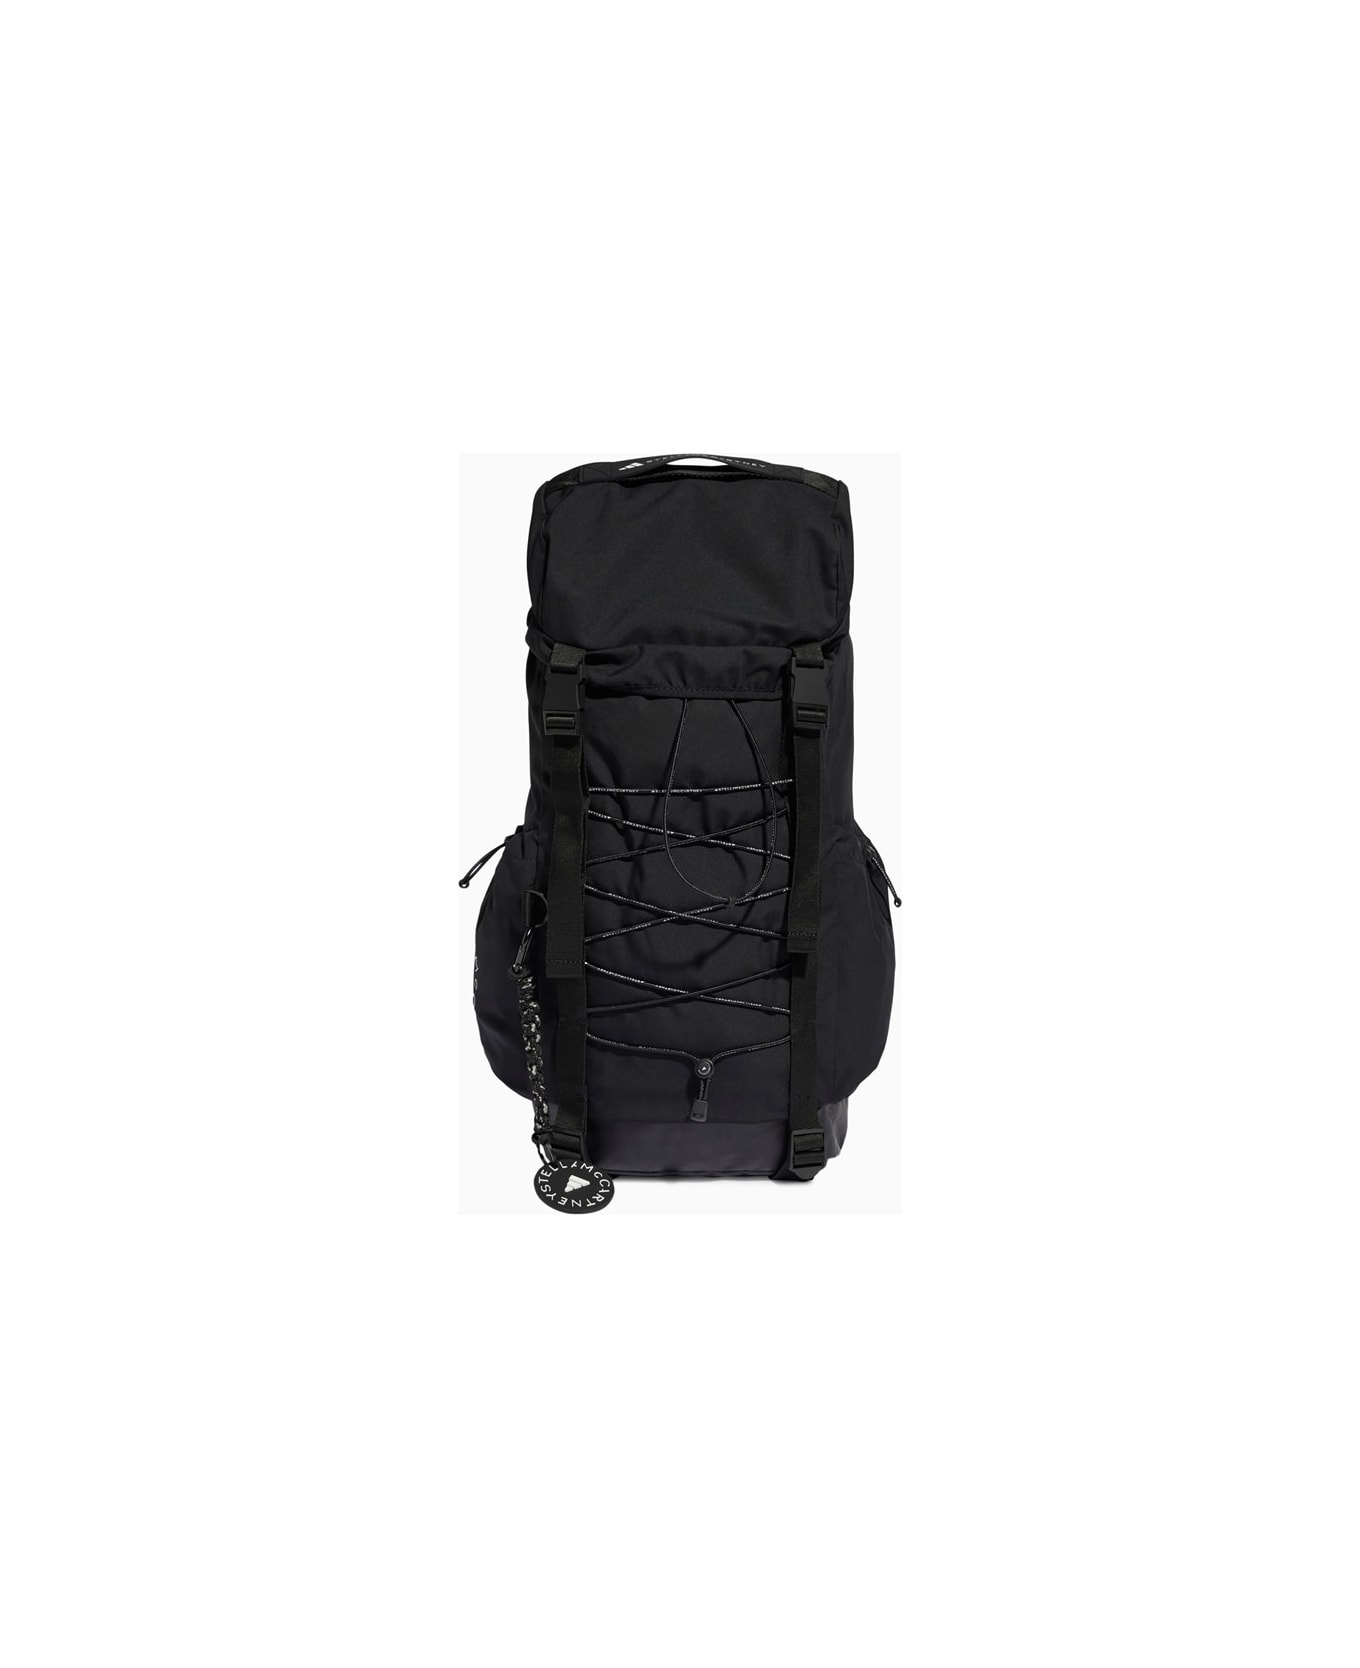 Adidas by Stella McCartney Backpack In9103 バックパック